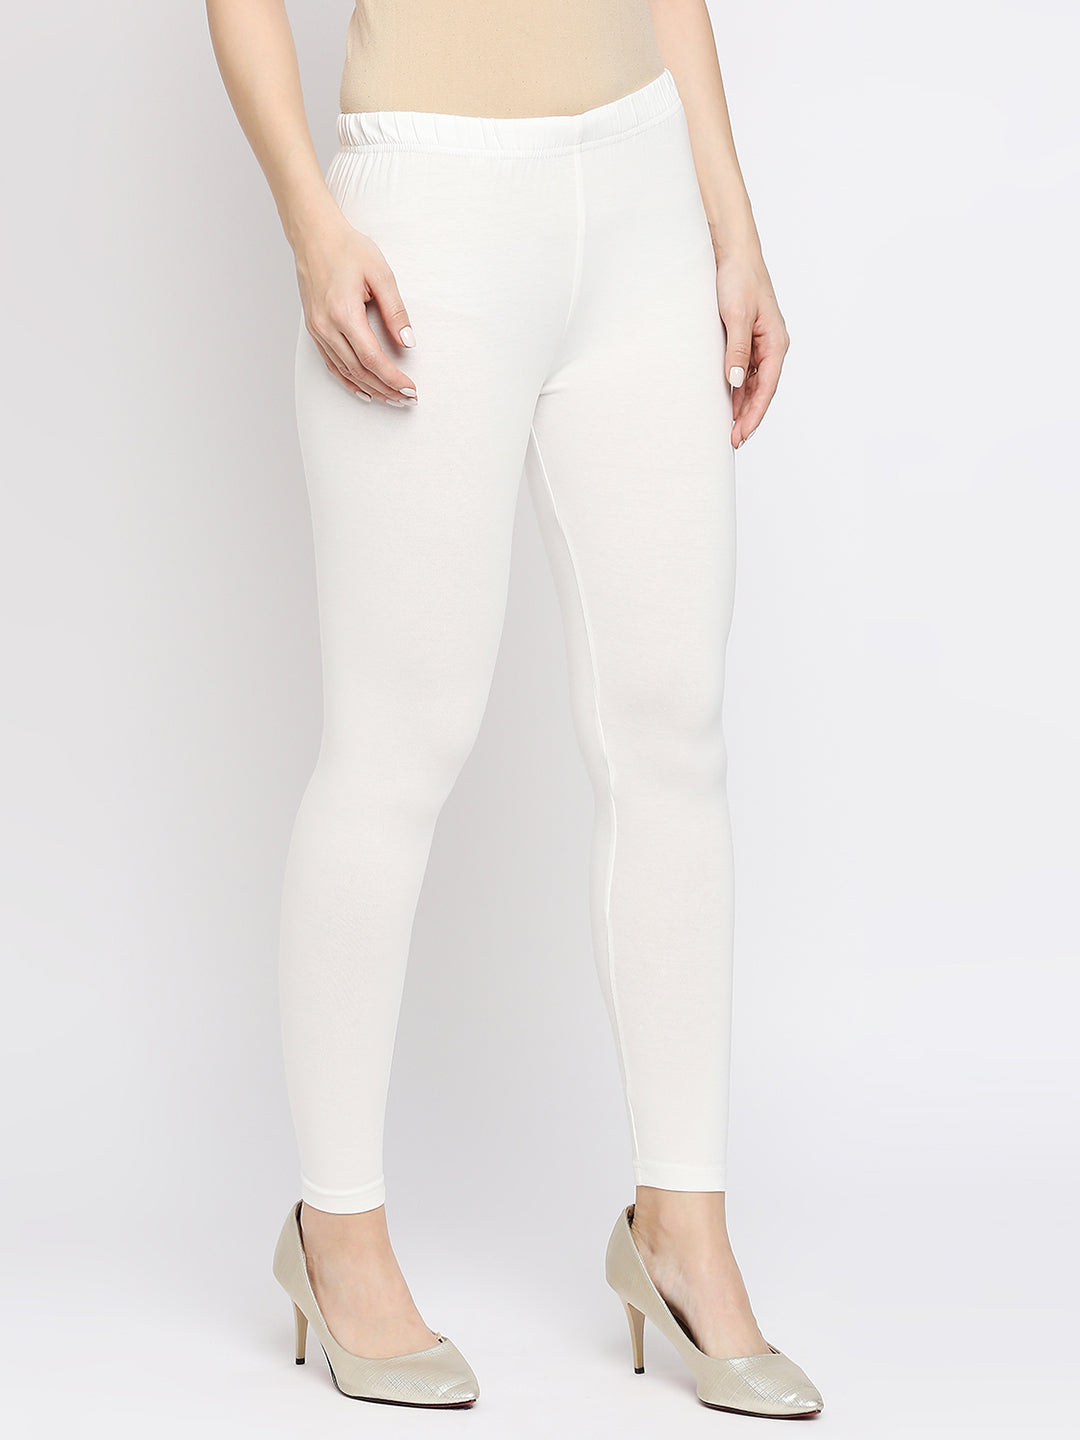 Buy Now,Women's Off White Cotton Lycra Solid Leggings - Ethnicity India